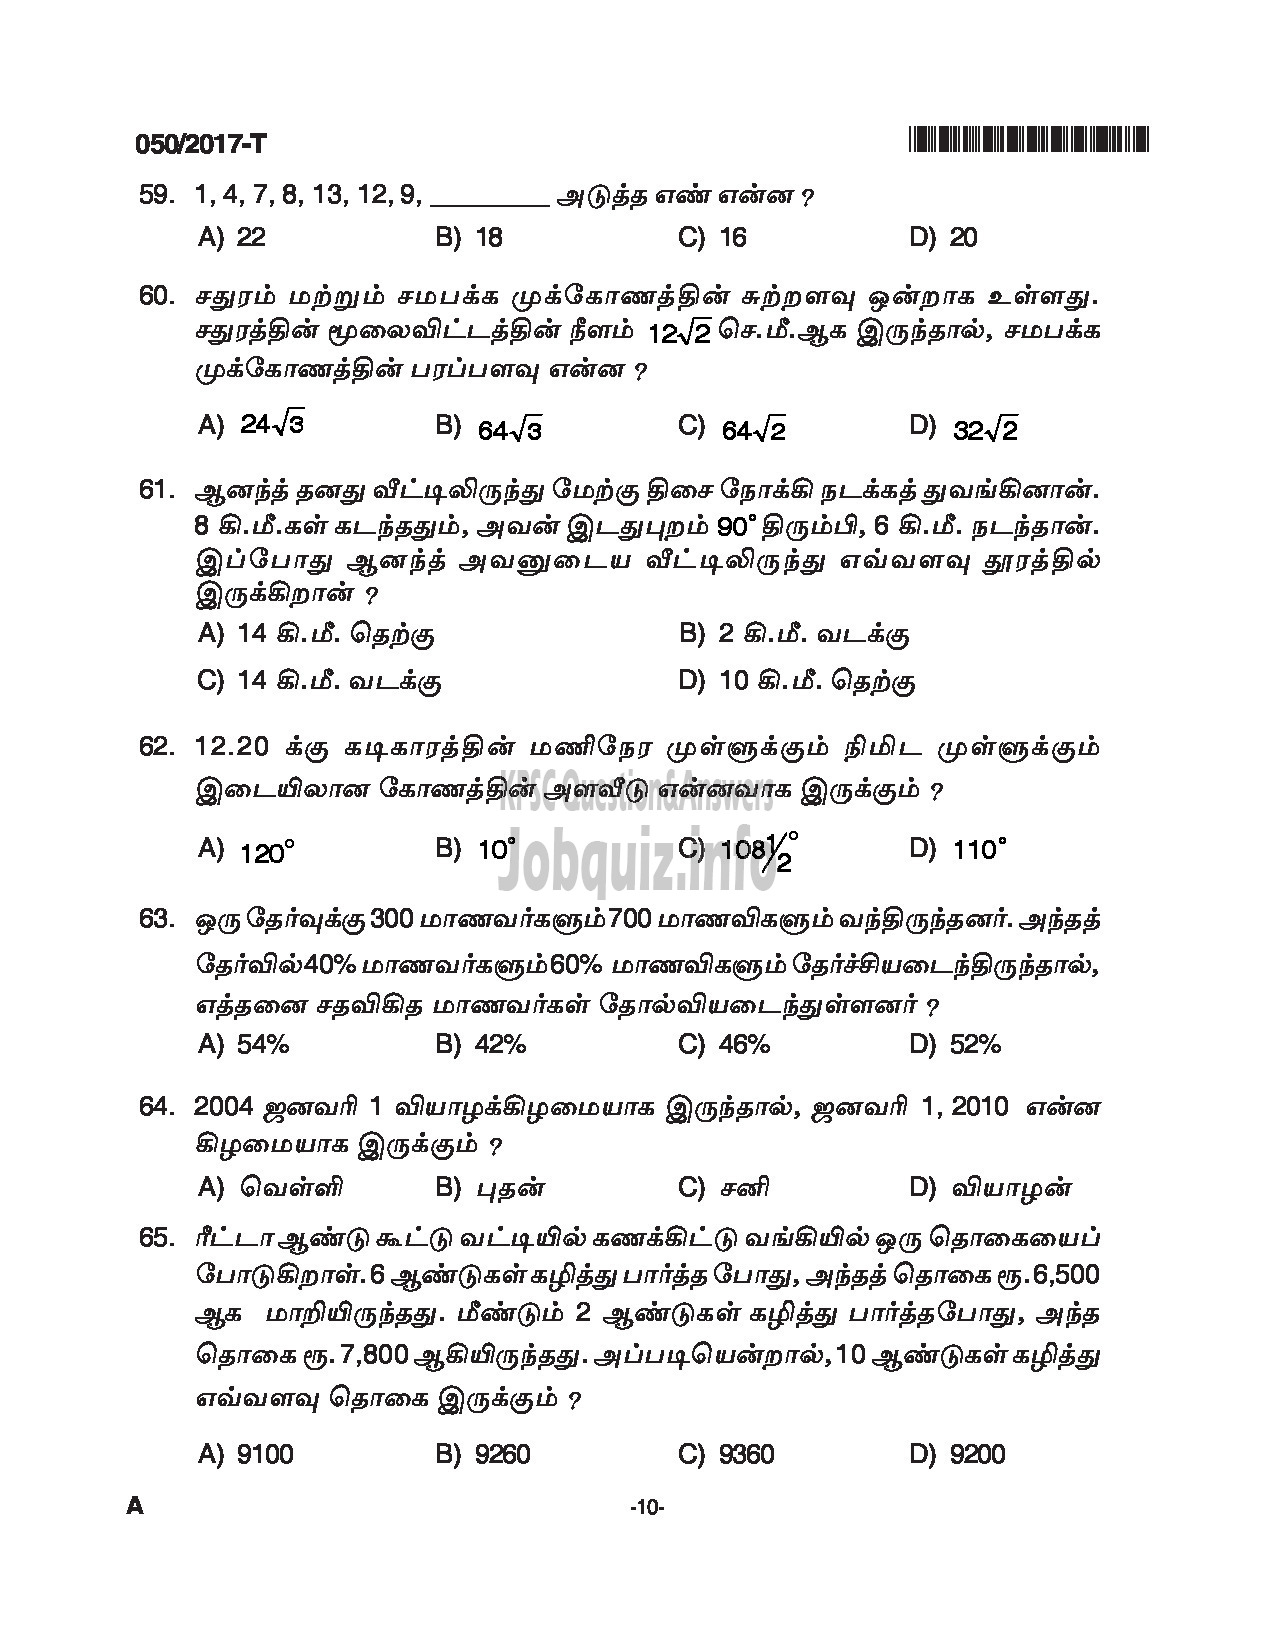 Kerala PSC Question Paper - LDC SR FOR SC/ST, SR FROM DIFFERENTLY ABLED CANDIDATES CAT.NO 122/16, 413/16 QUESTION PAPER(TAMIL)-10